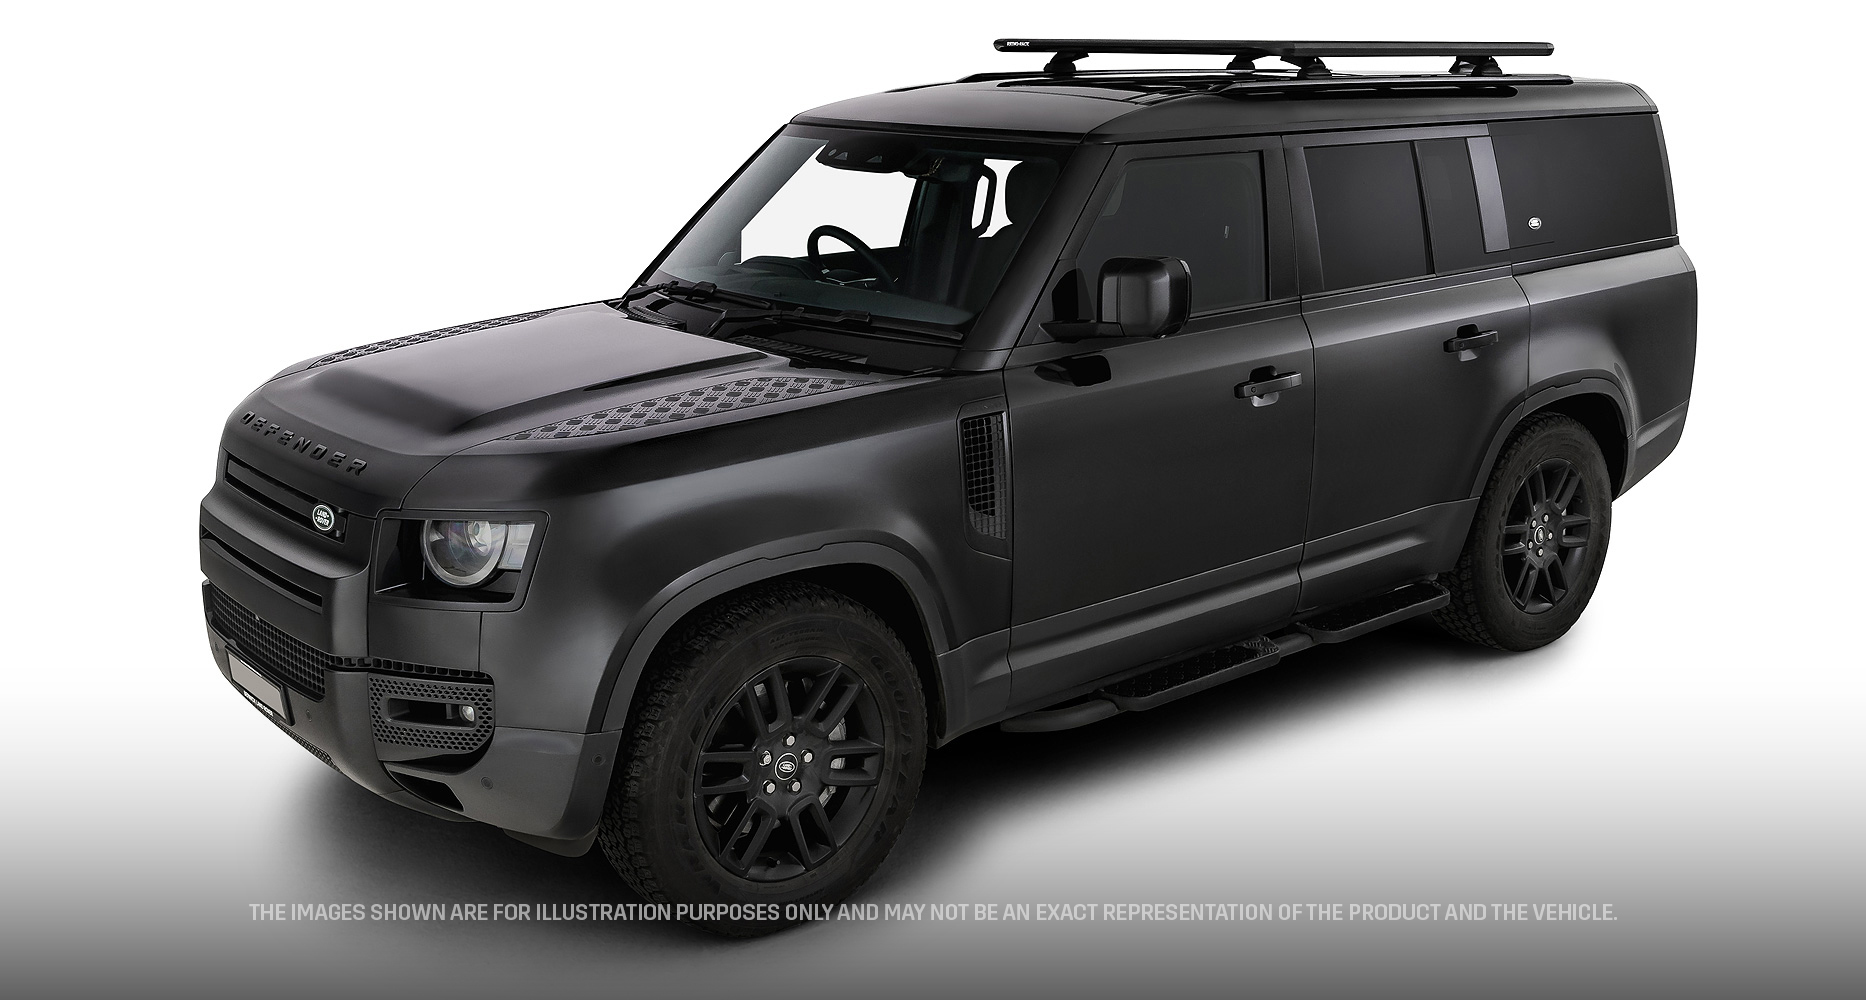 Rhino Rack JC-01928 Pioneer 6 Platform (1500mm x 1240mm) with RCL Legs for Land Rover Defender 90 Gen2 3dr SUV with Factory Fitted Track (2020 onwards) - Factory Point Mount